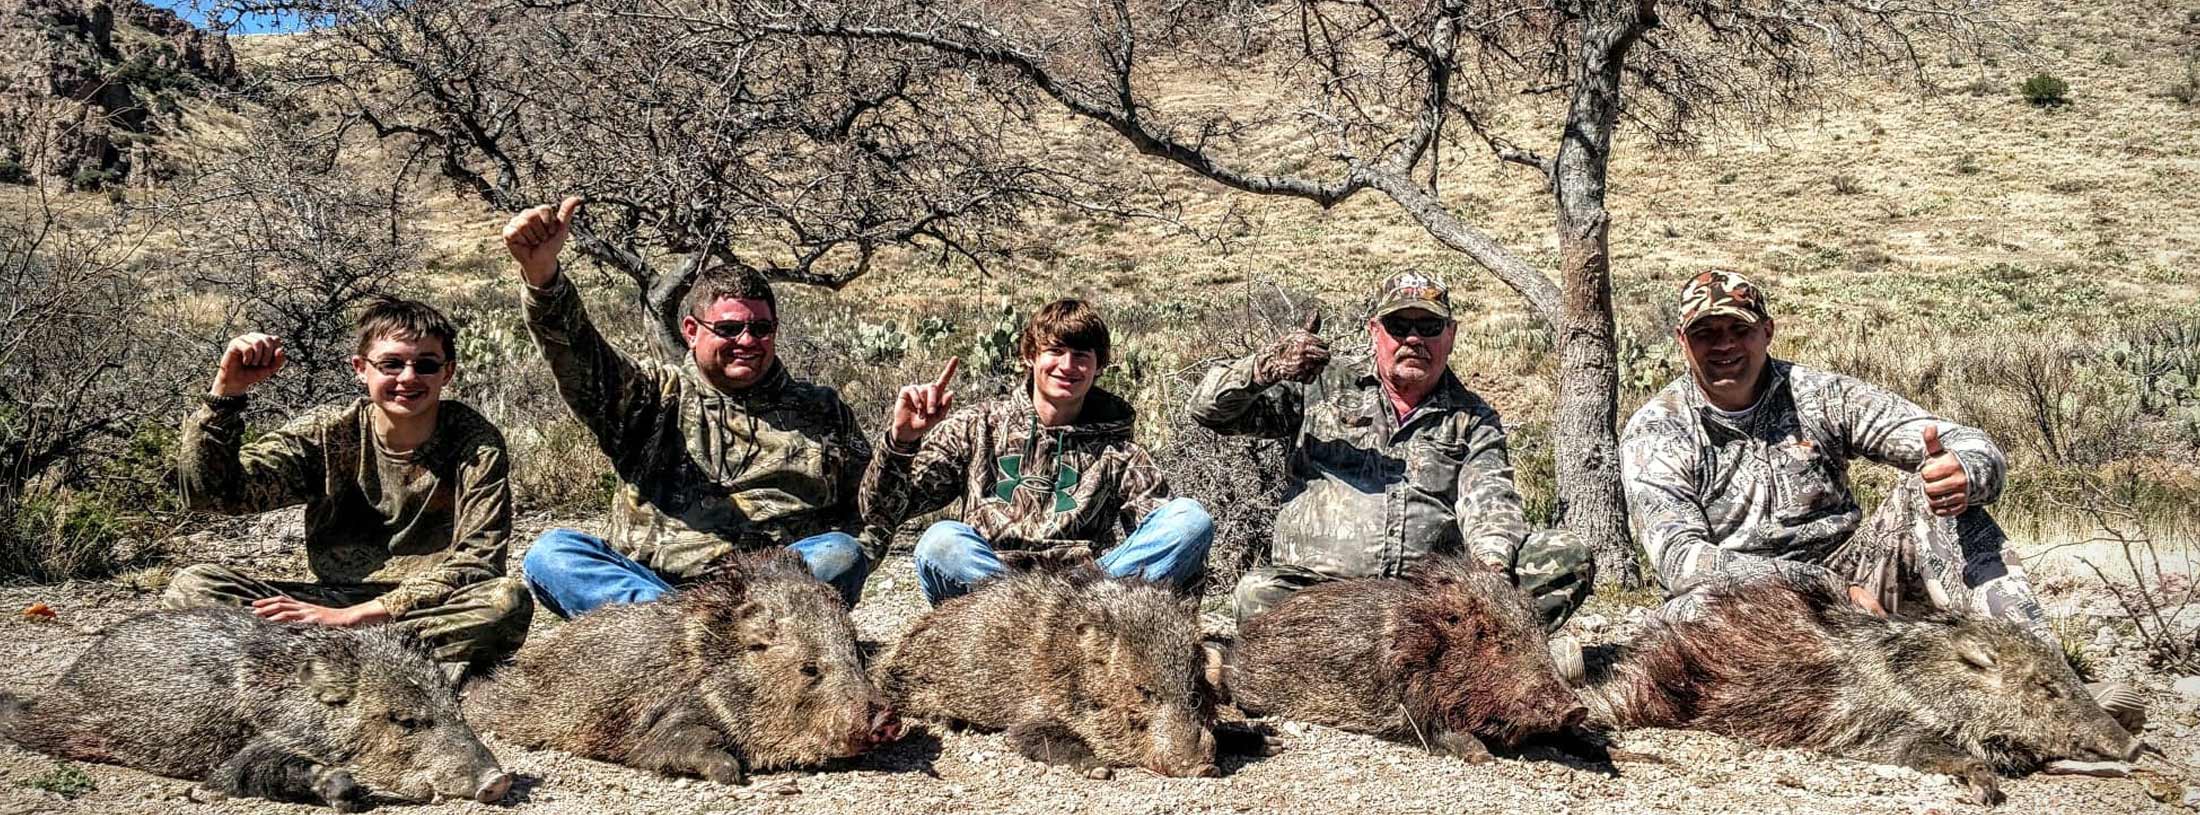 Hunting Guides in Arizona